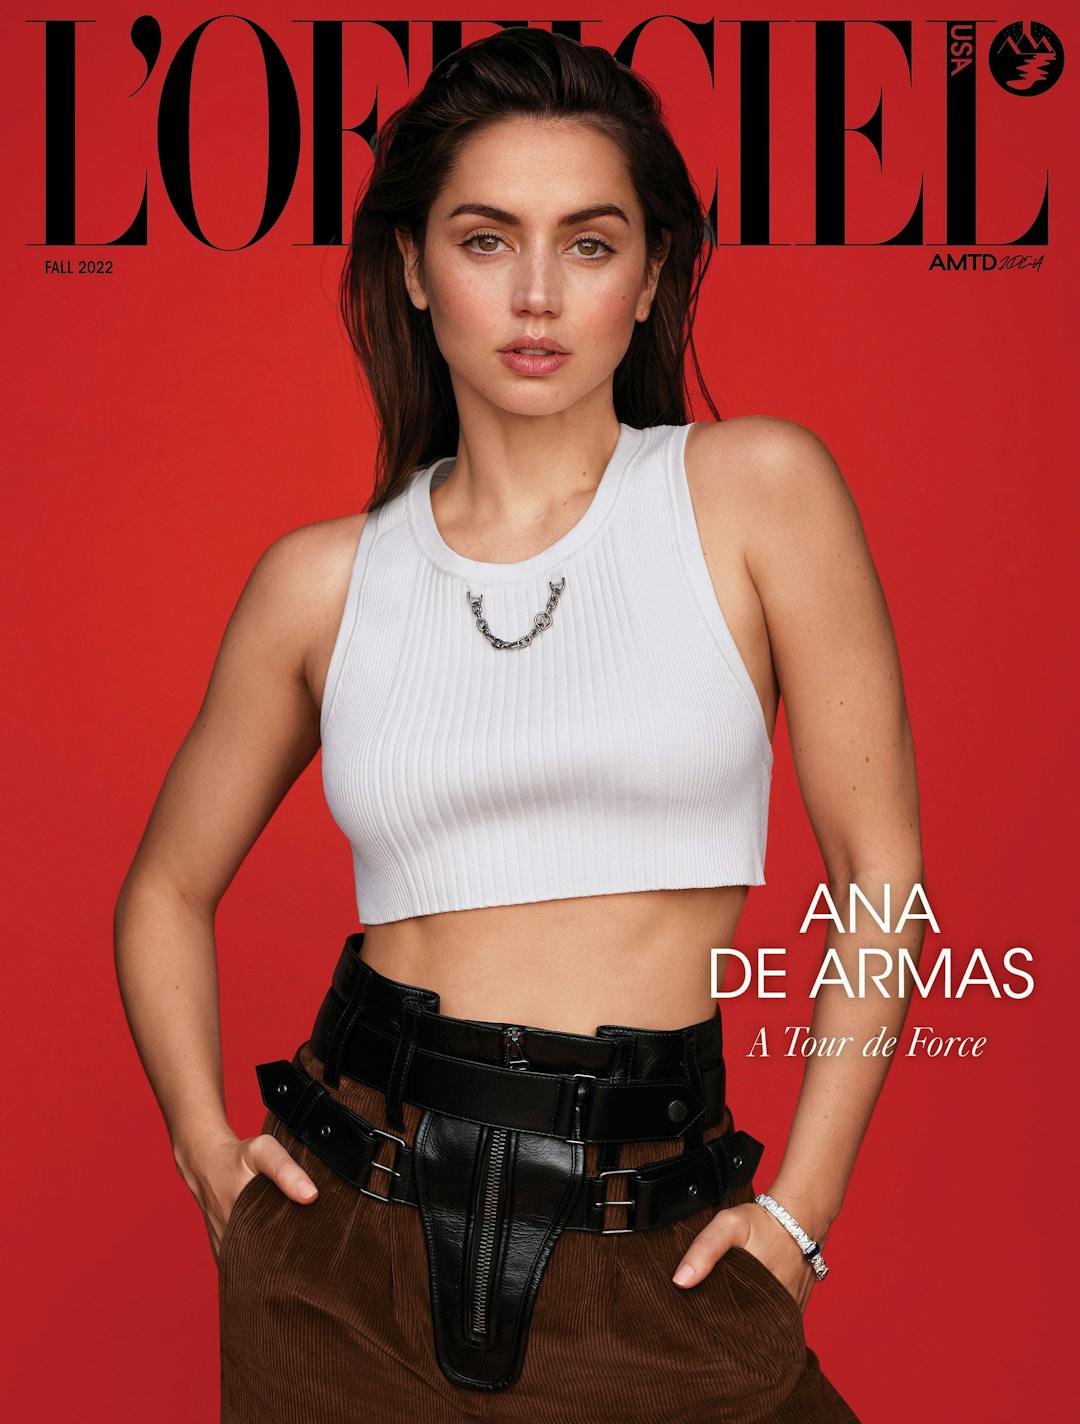 L’OFFICIEL USA Fall 2022 Issue with Ana de Armas